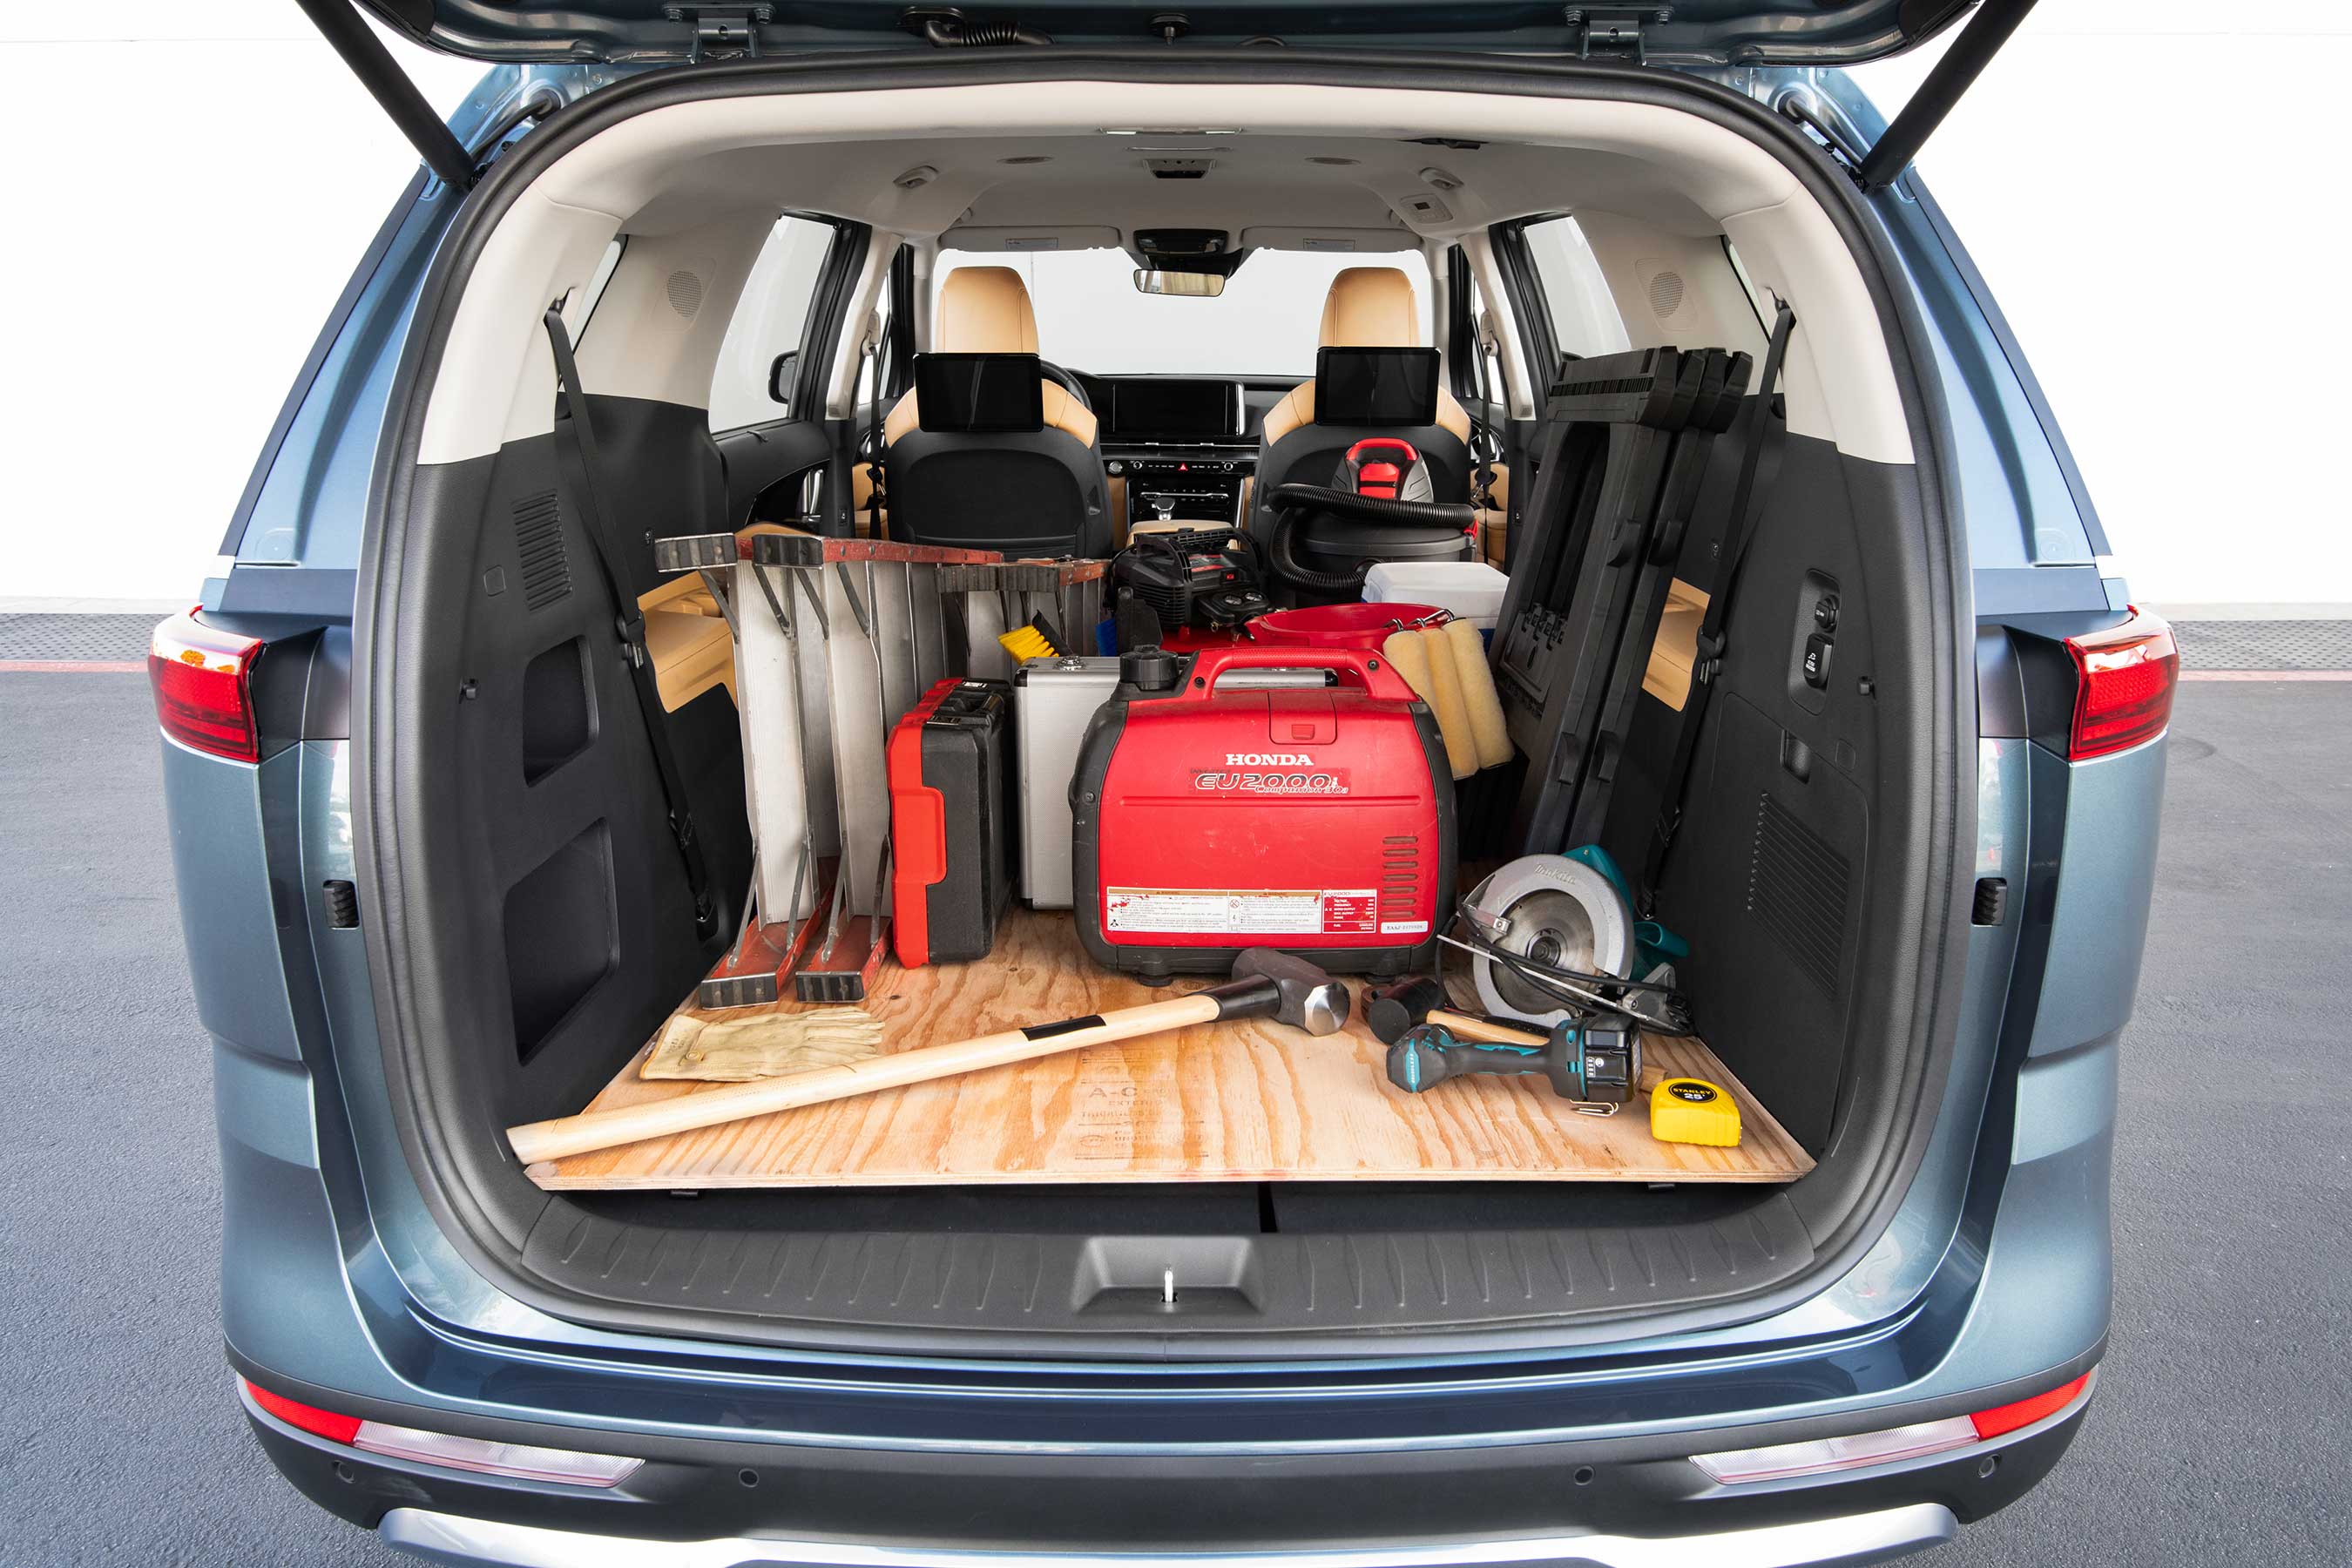 All-new 2020 Kia Carnival MPV is roomier and features more utility with best-in-class passenger room and best-in-class cargo room.